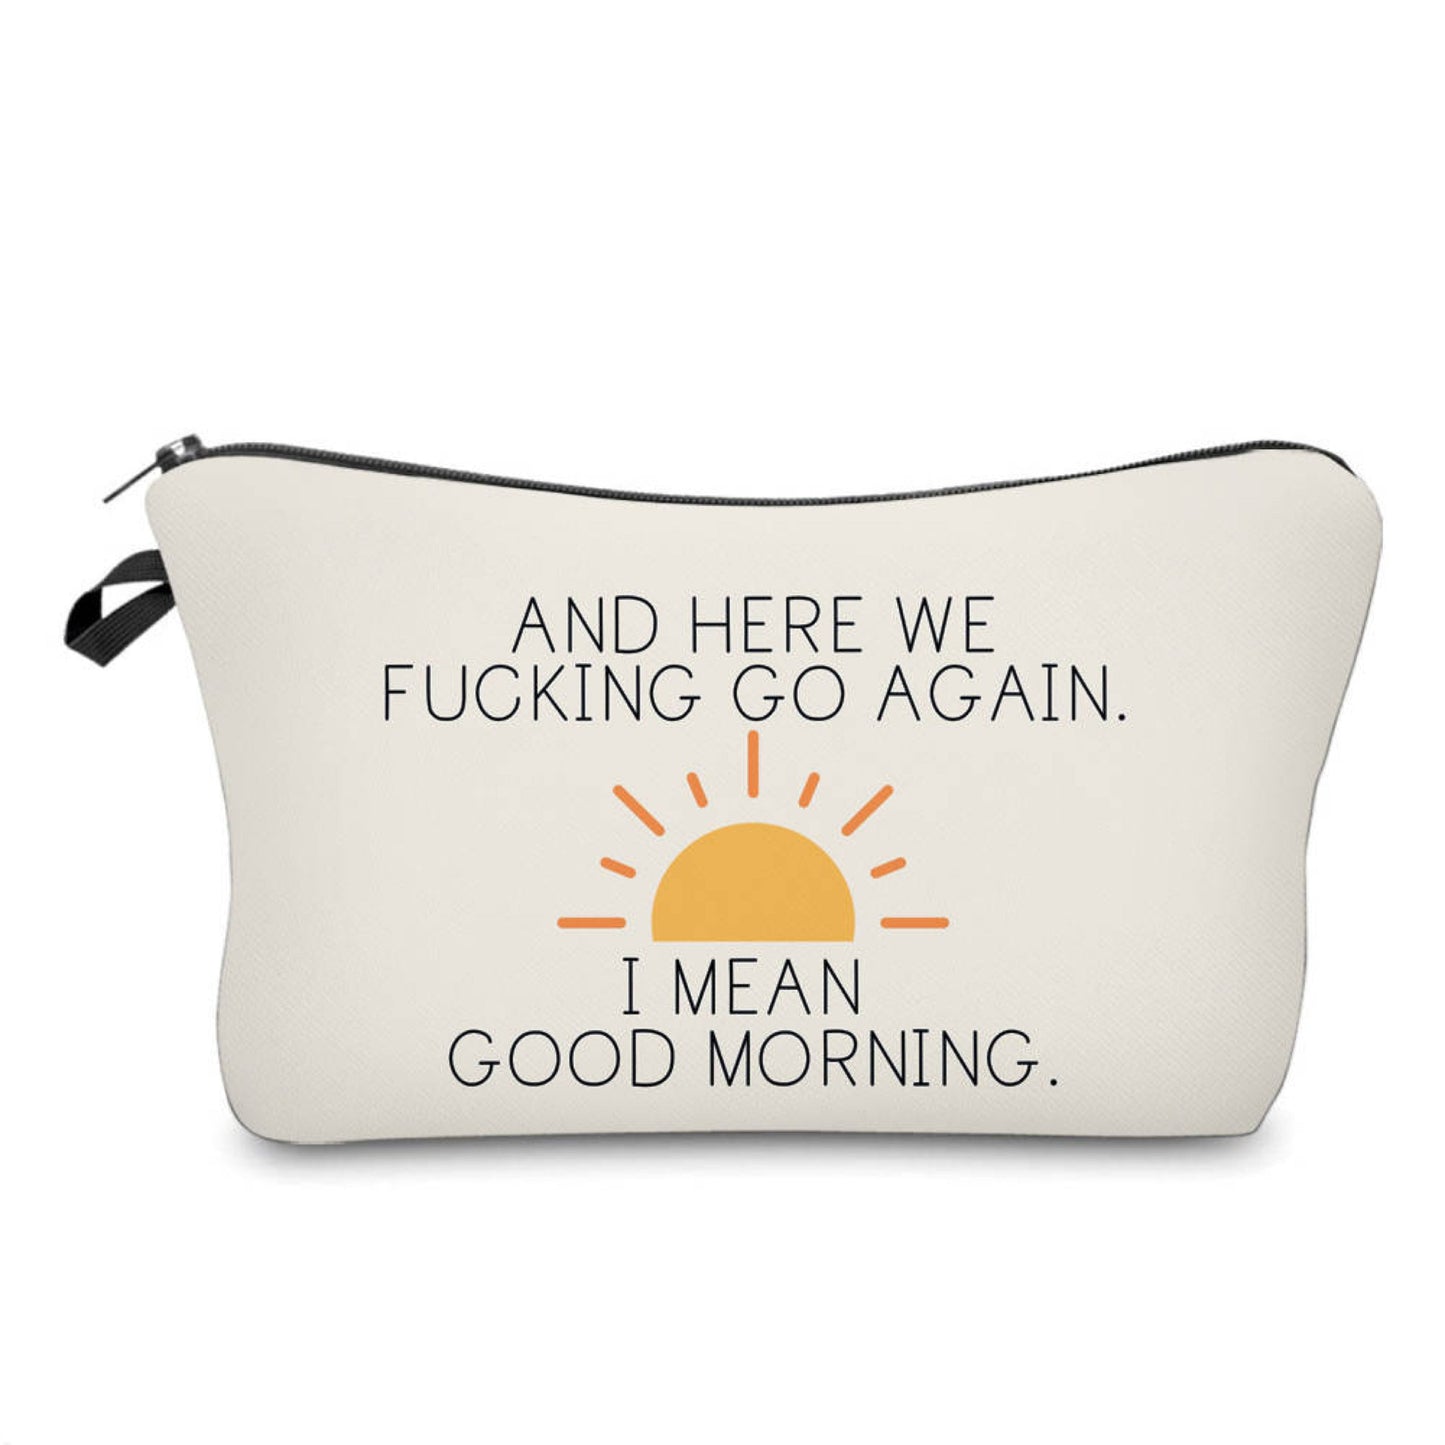 Fucking Good Morning - Water-Resistant Multi-Use Pouch